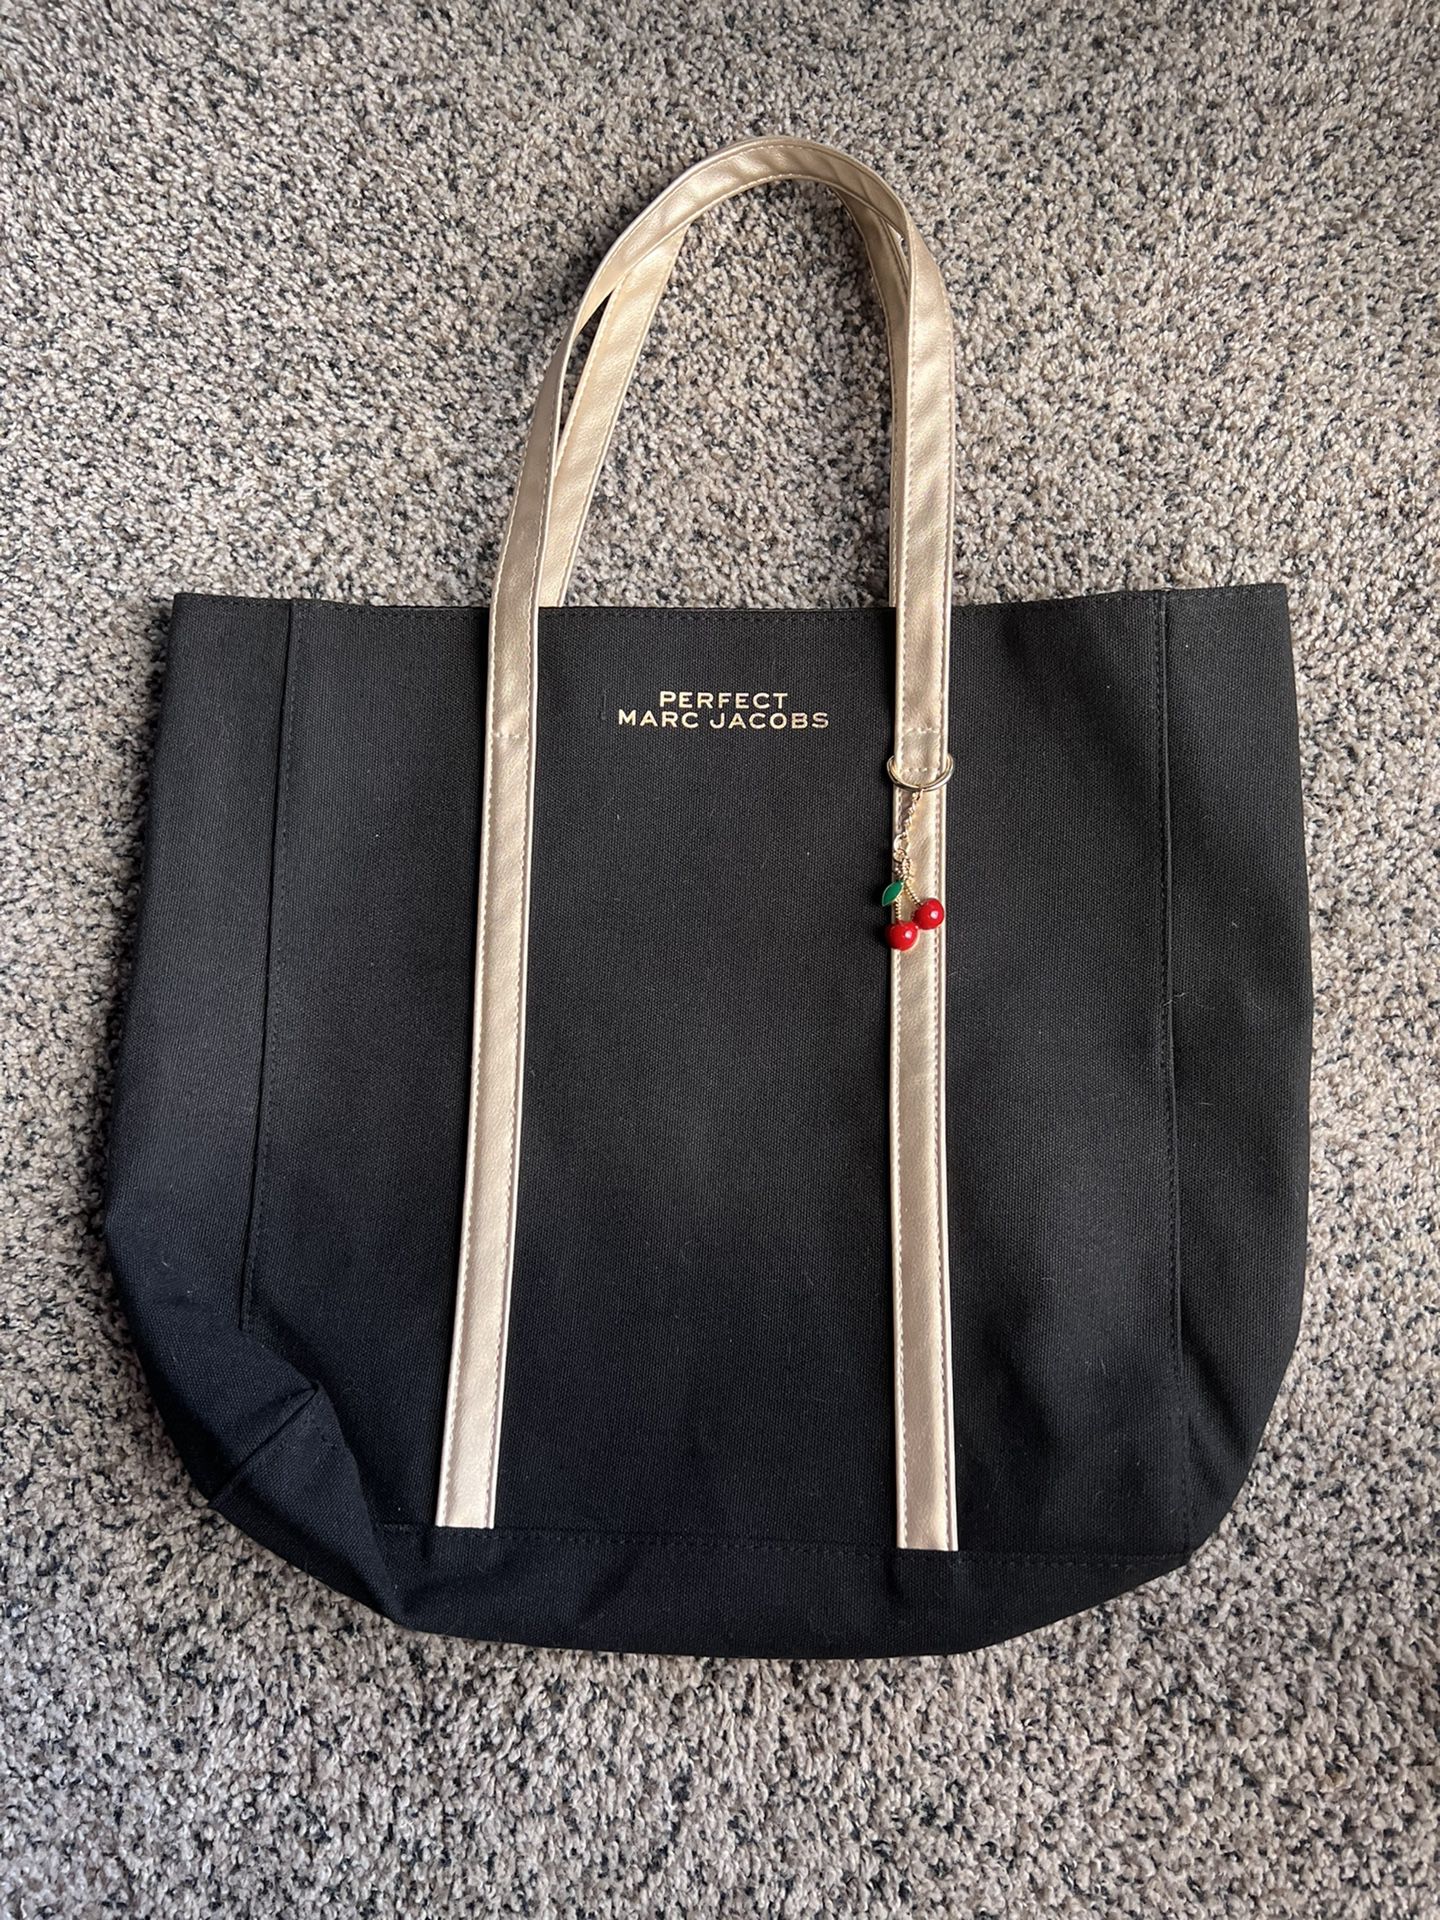 Perfect Marc Jacobs tote